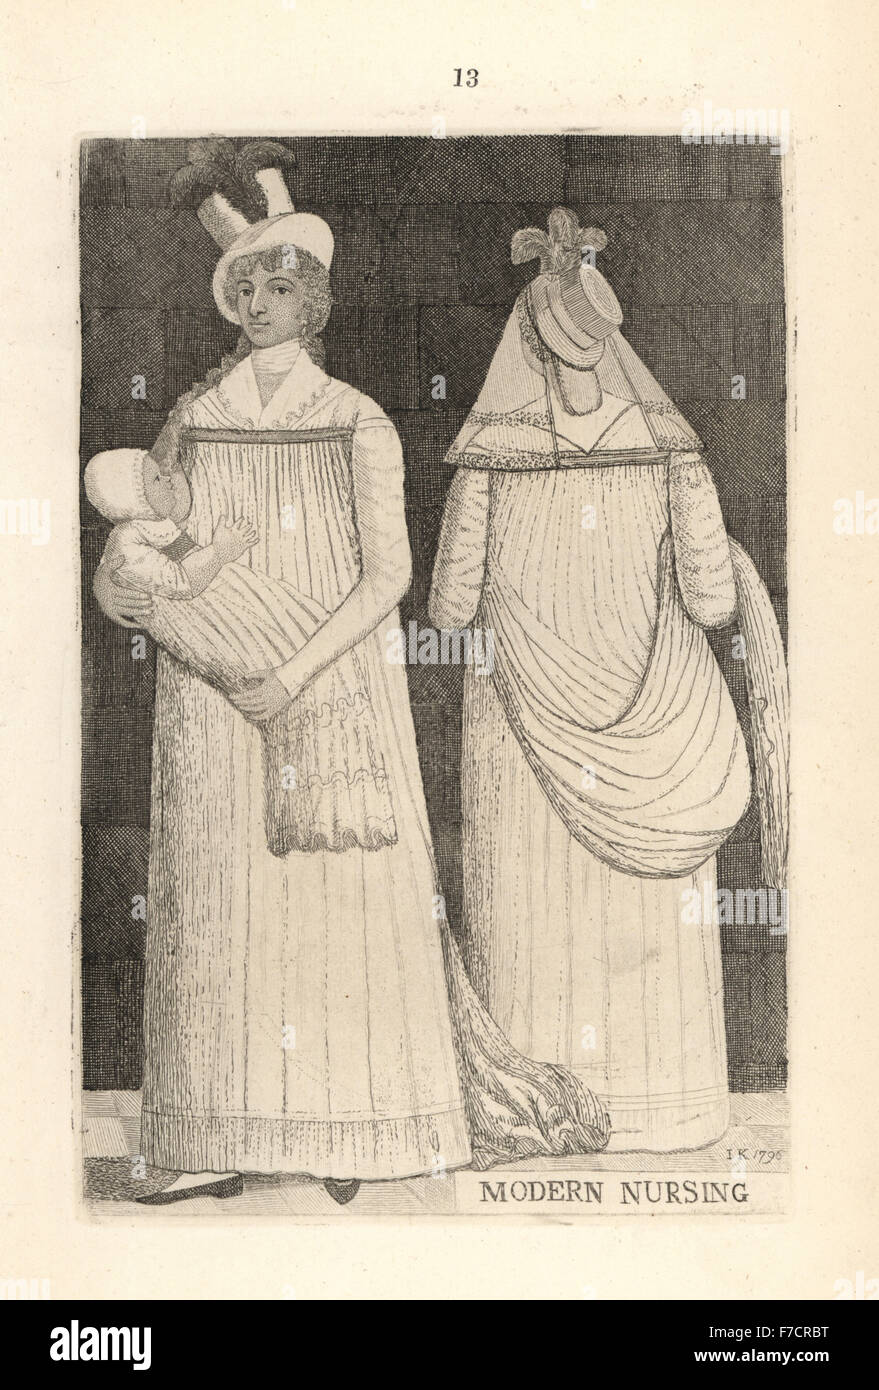 Modern Nursing, satire of the short-waisted gowns fashionable in the 1790s. Copperplate engraving by John Kay from A Series of Original Portraits and Caricature Etchings, Hugh Paton, Edinburgh, 1842. Stock Photo